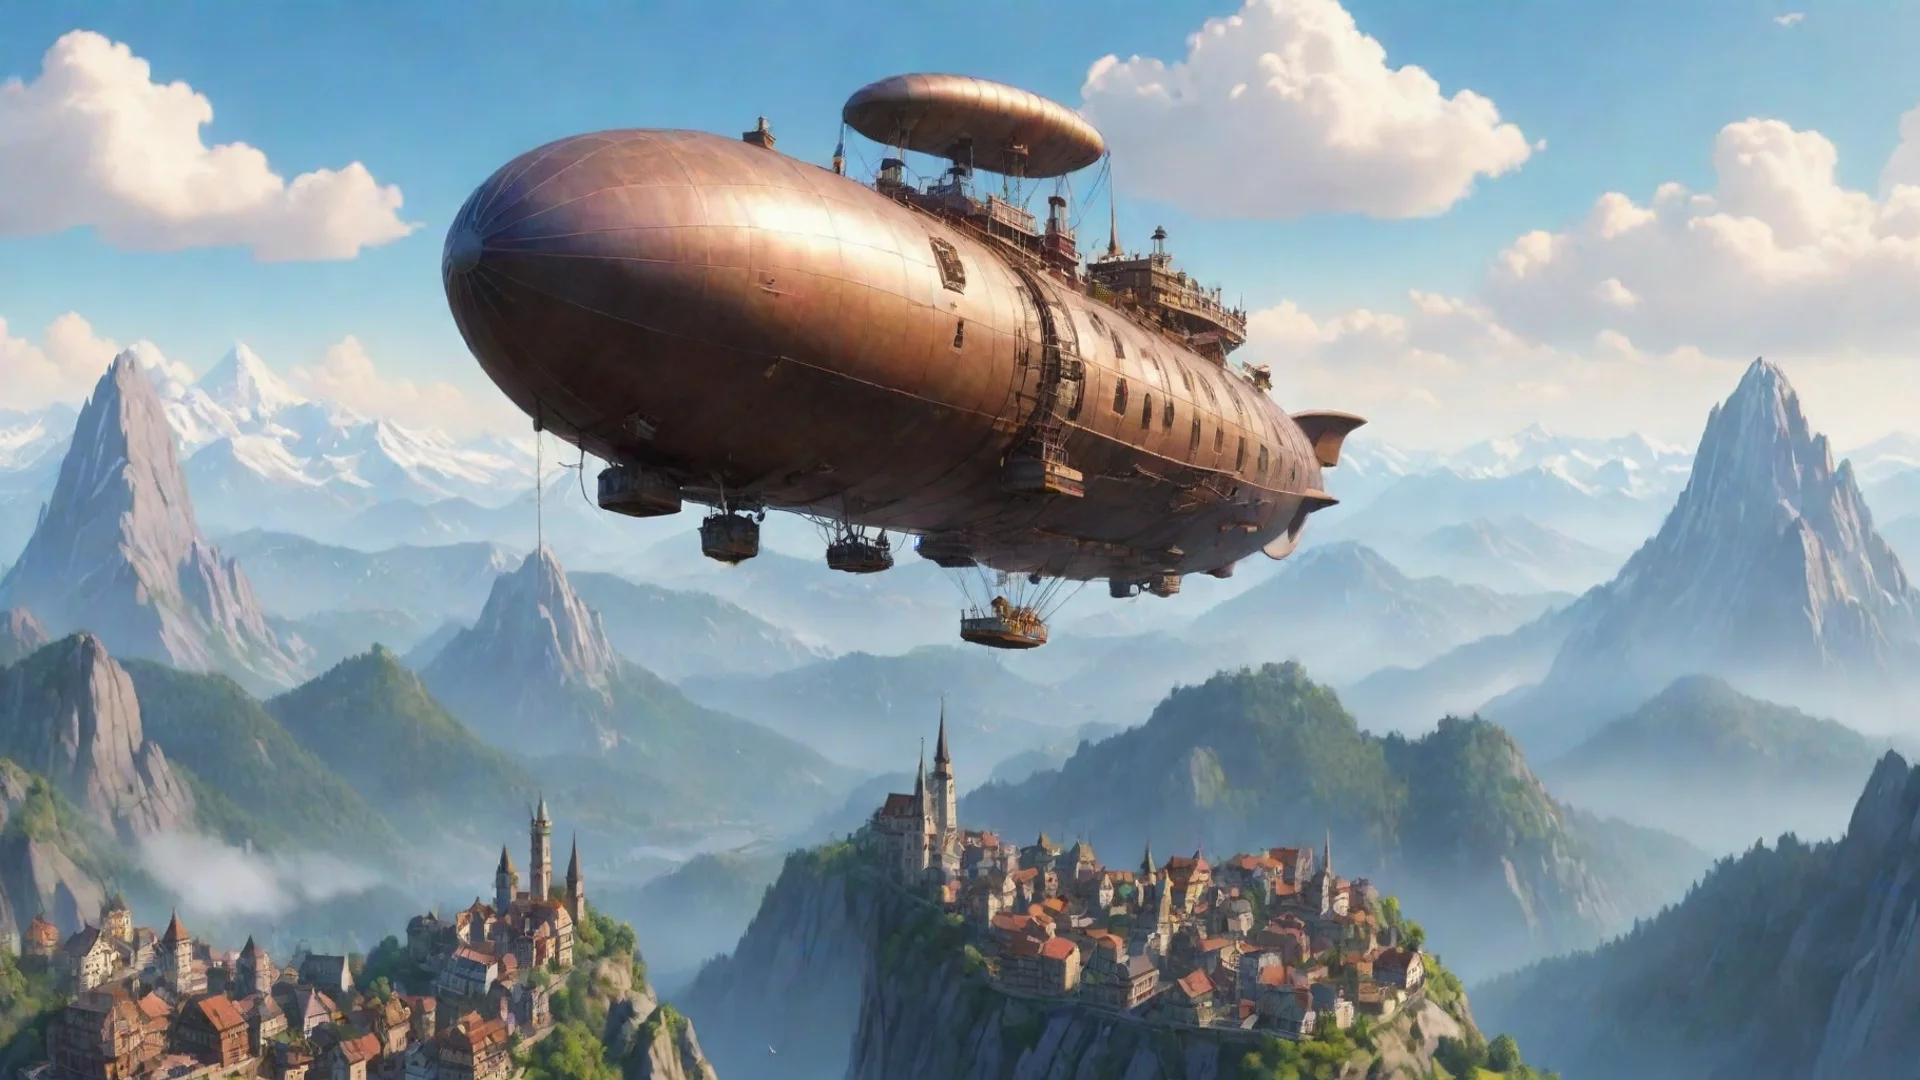 aiartstation art amazing realistic cartoon city flying airship mountain top relaxing calm hd aesthetic peace confident engaging wow 3 wide